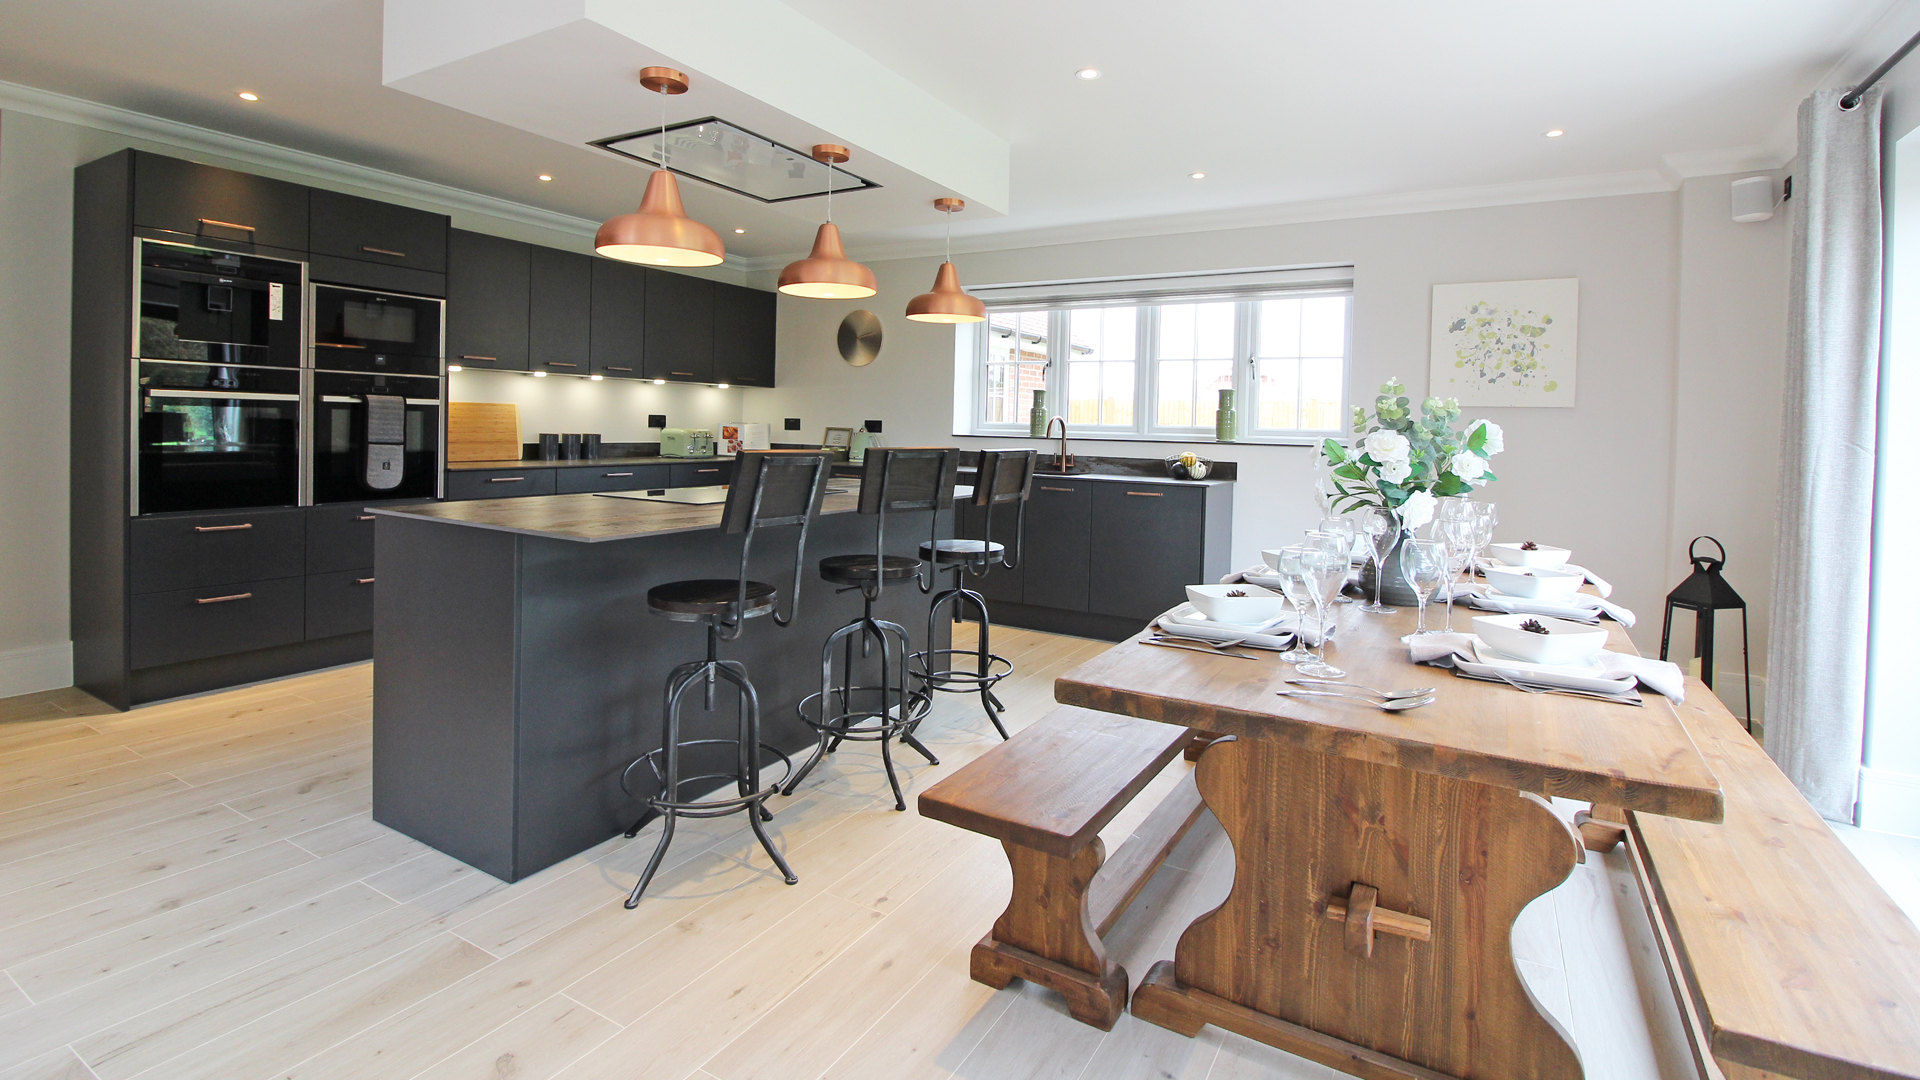 Fitted kitchen with rustic kitchen table and benches at Plot 14 Weavers park.